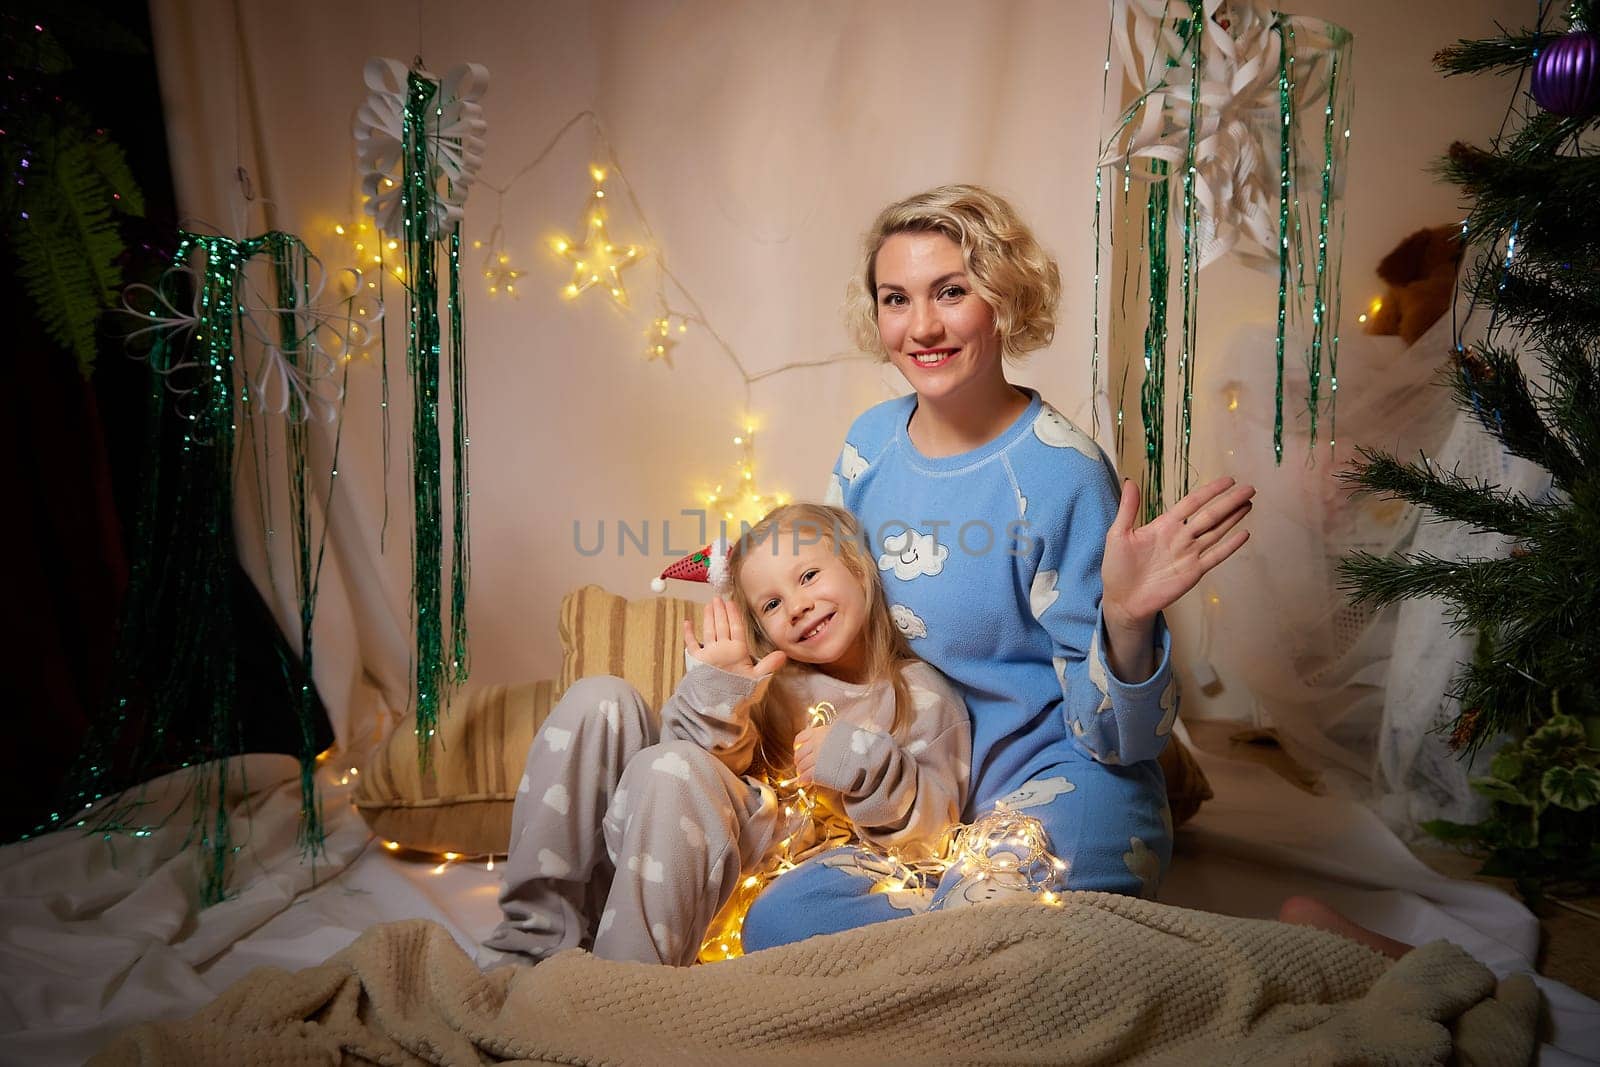 Cute mother and daughter in pajamas having fun in the room with Christmas garlands and white background. The tradition of decorating the house for holidays. Happy childhood and motherhood